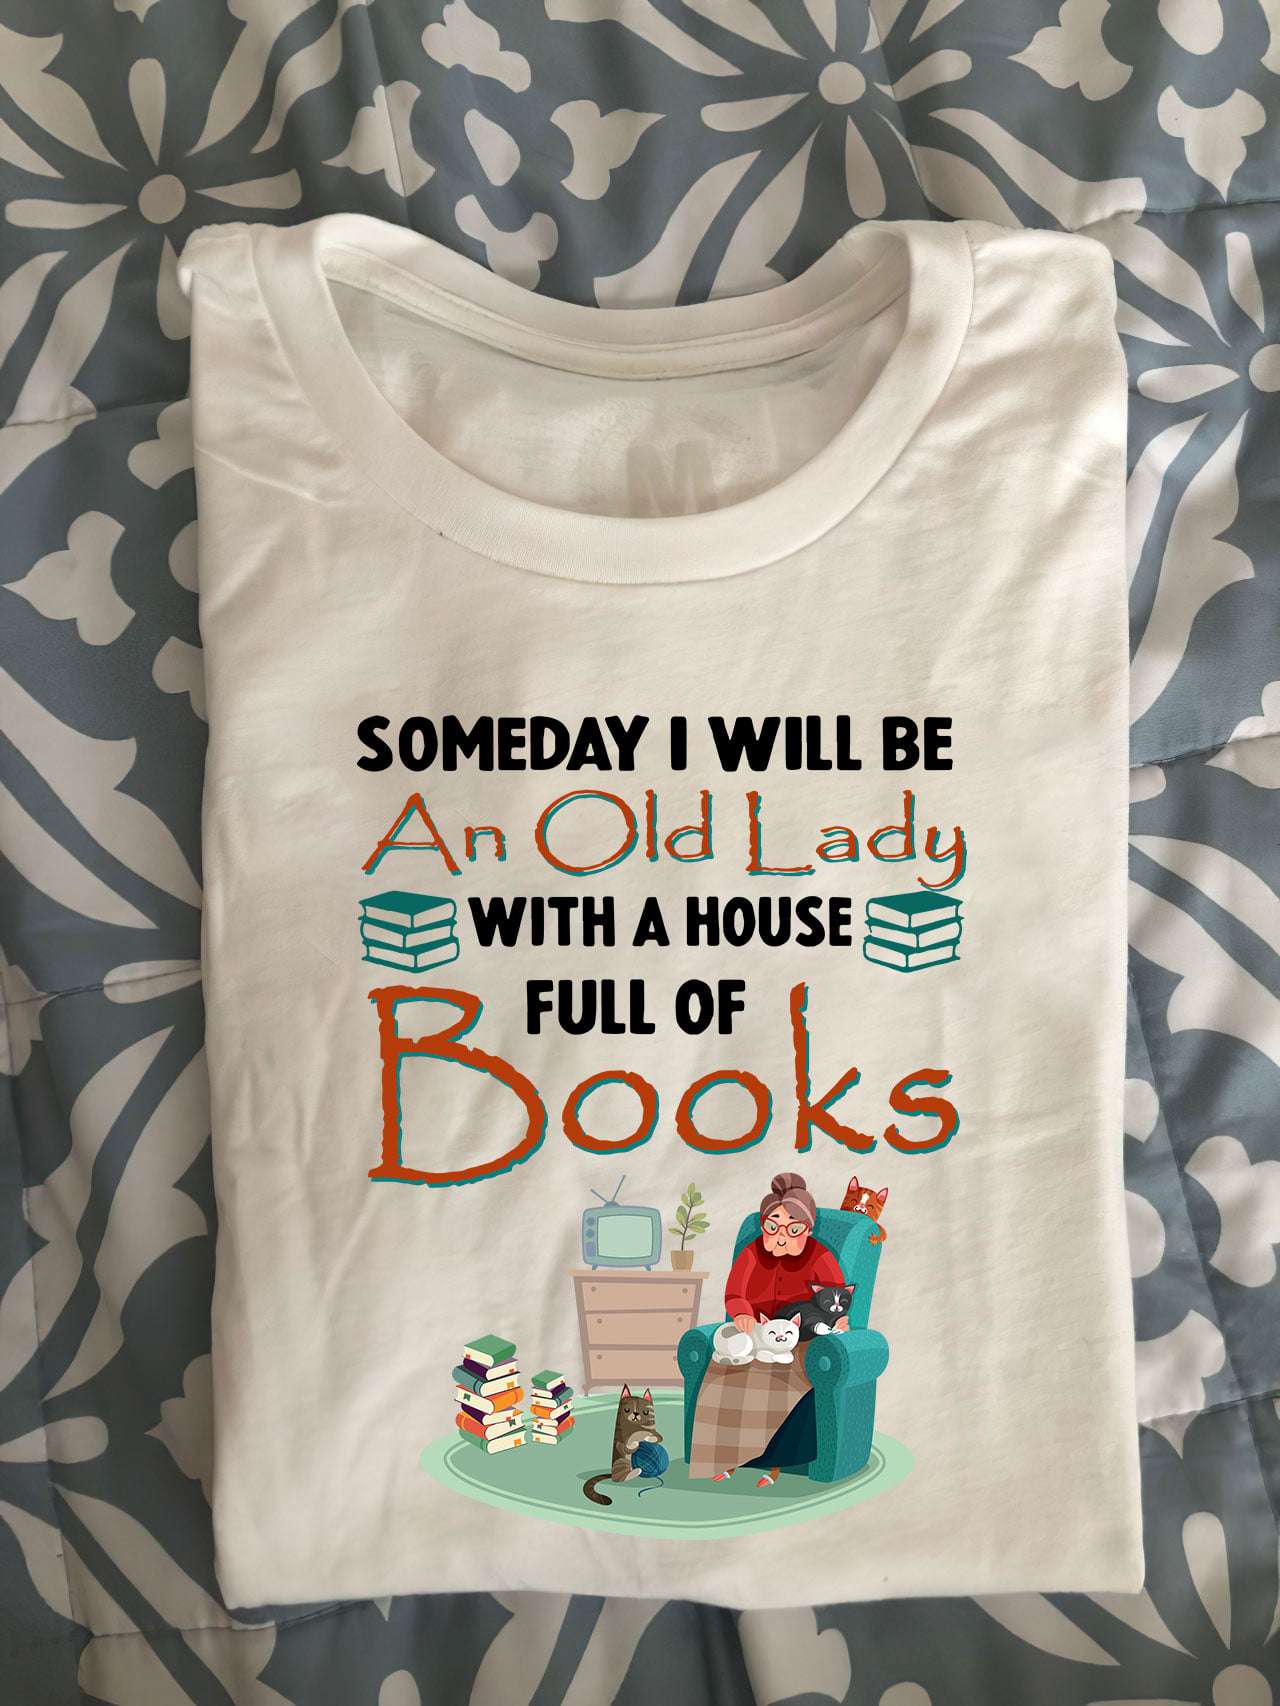 Someday I will be an old lady with a house full of books - Old lady bookaholic, book and cat